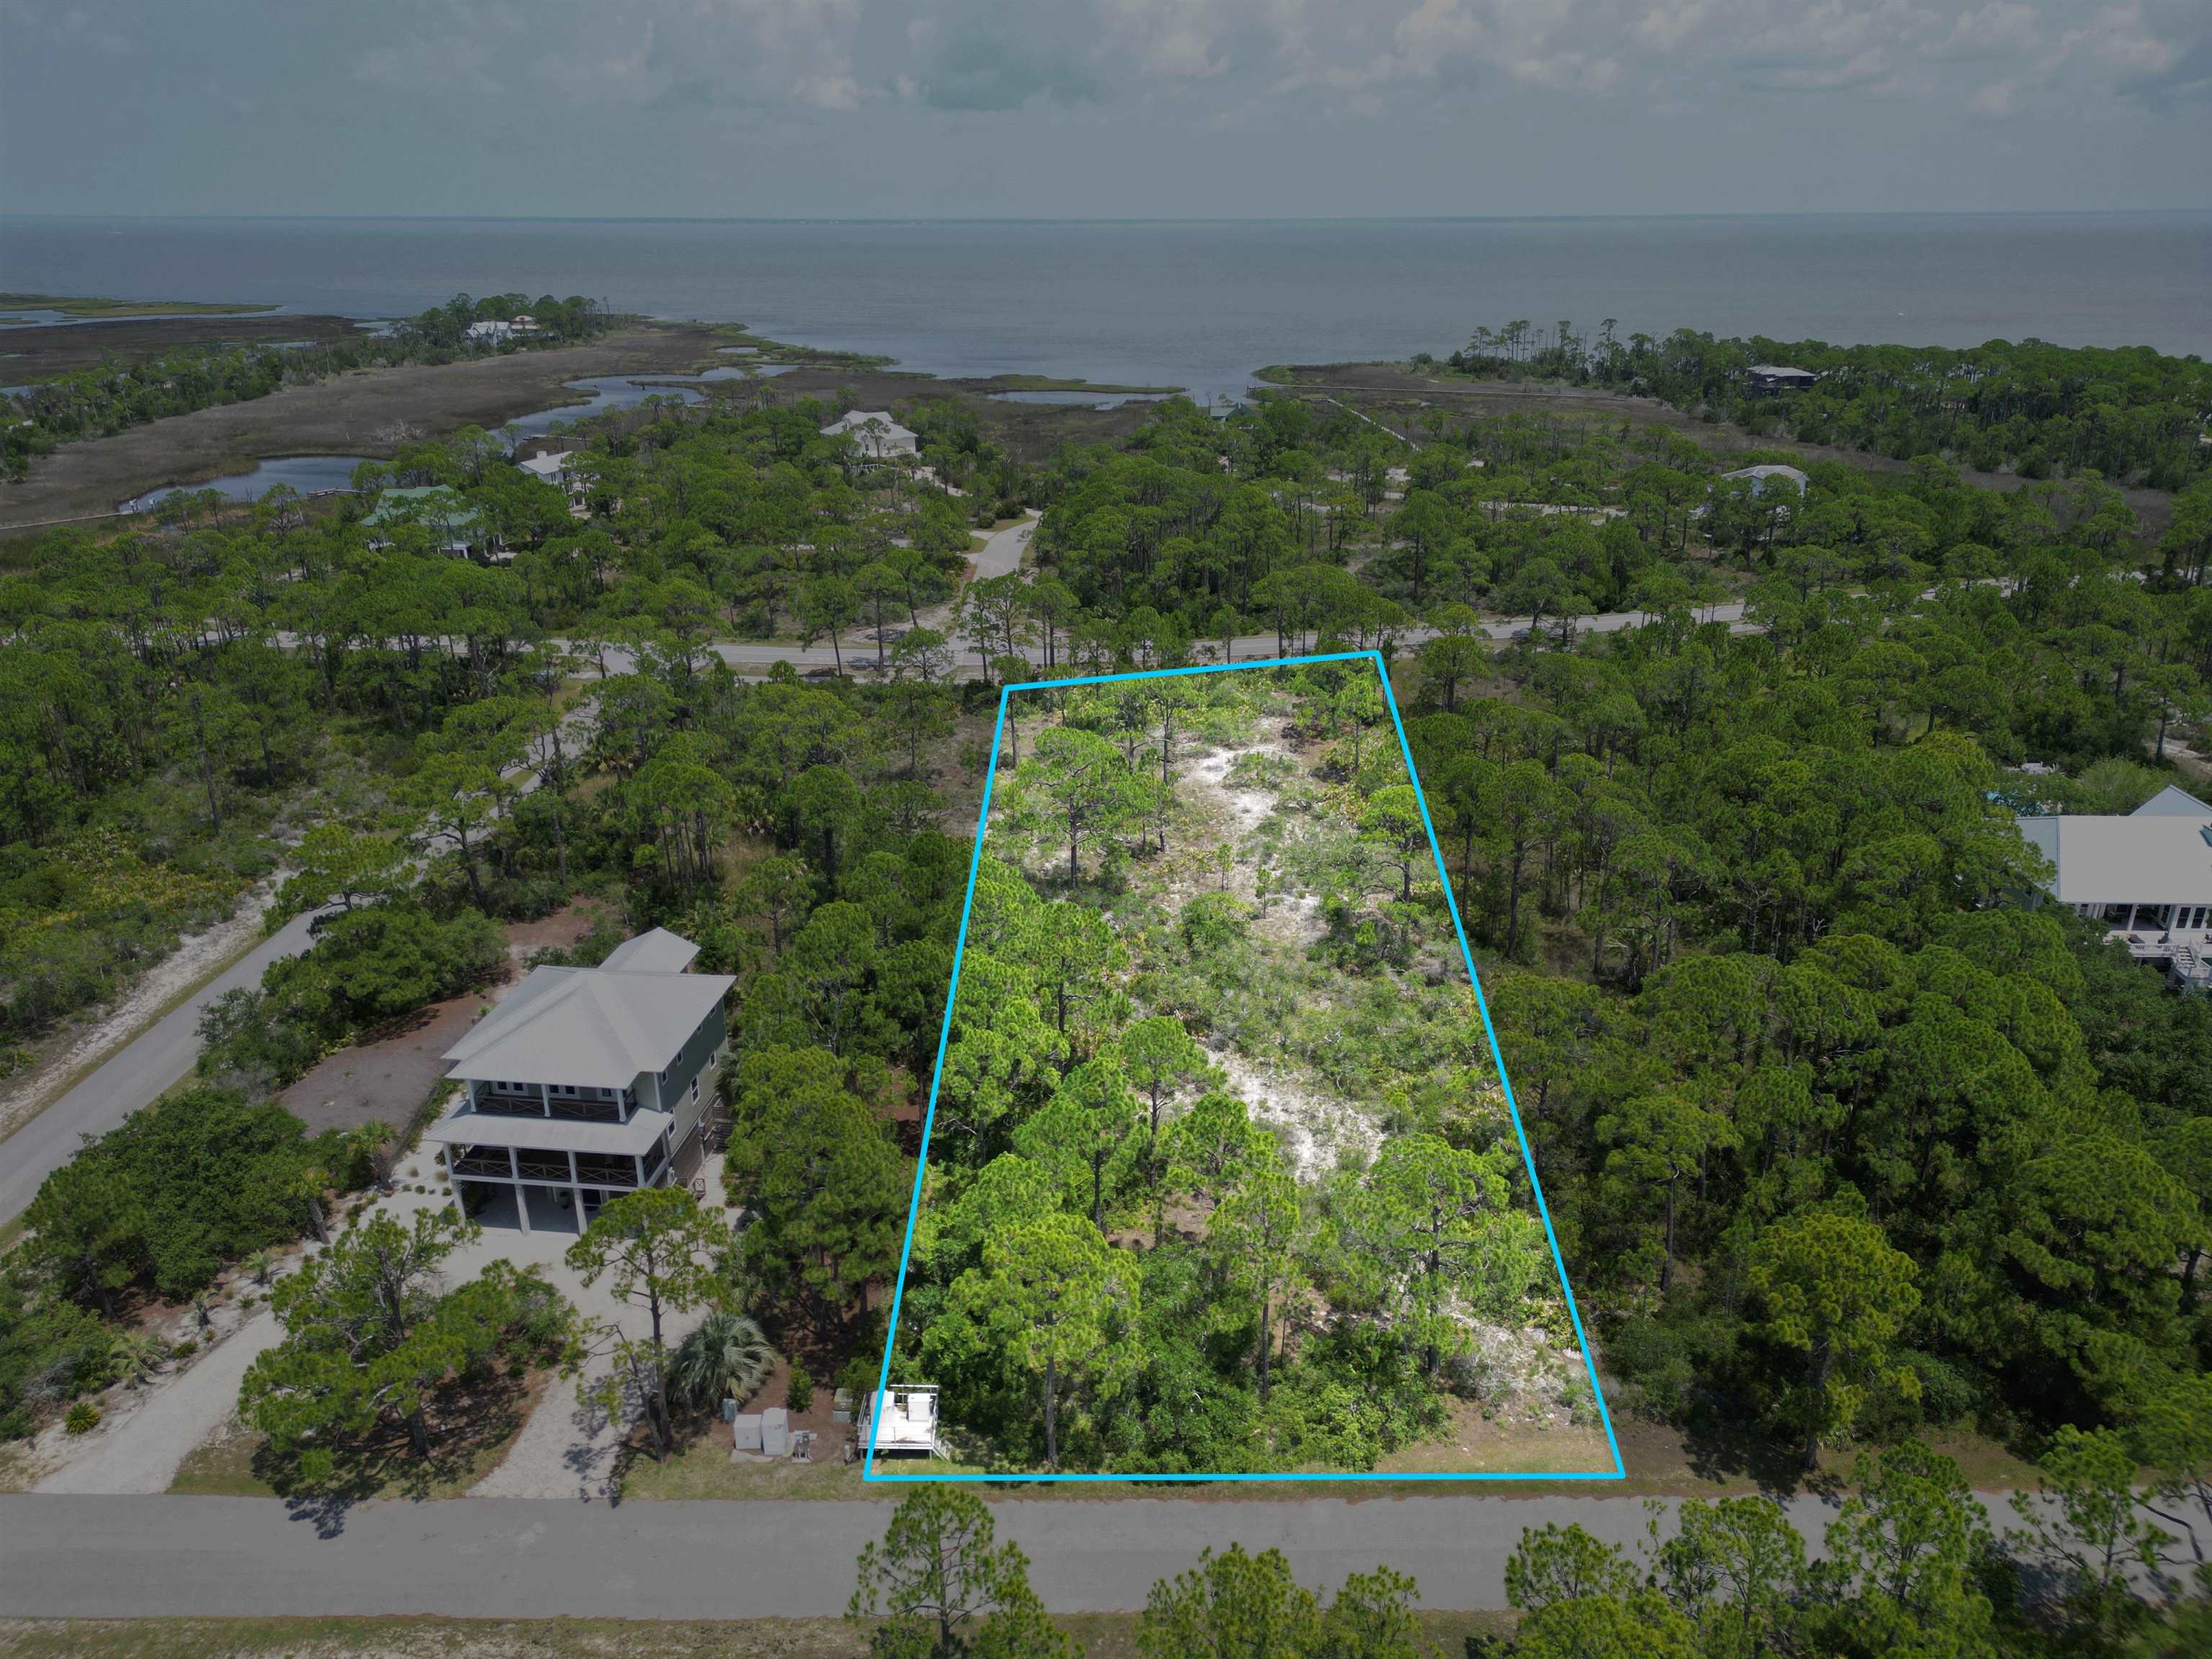 Looking for space to spread out with privacy and sunshine? This once-in-a-lifetime opportunity to acquire 1.33 acres on the beautiful St George Island. St. George Plantation is a coastal gated community located on St. George Island in the Gulf of Mexico along the Florida Panhandle. Separated by the famous Apalachicola Bay to the north and the Gulf of Mexico to the south the beautiful 28-mile long barrier island connects to the mainland by Florida's third longest bridge. The graceful Bryant Patton Bridge curves and arches its way across the Bay to avoid disturbing oyster beds, seagrasses, and nesting grounds for native sea birds. On the east end of the island, Dr. Julian G. Bruce St. George Island State Park offers visitors nine miles of undeveloped beaches and dunes. On the west end, the St. George Plantation occupies 1200 acres of beautifully balanced nature and wildlife, pristine beaches, and solitude with beautiful homes, well-maintained amenities, and social and recreational activities. The St. George Island Plantation Owners' Association boasts the finest amenities along the “Forgotten Coast."  We have won awards for preserving our treasured environment and enhancing the quality of life for our property owners.